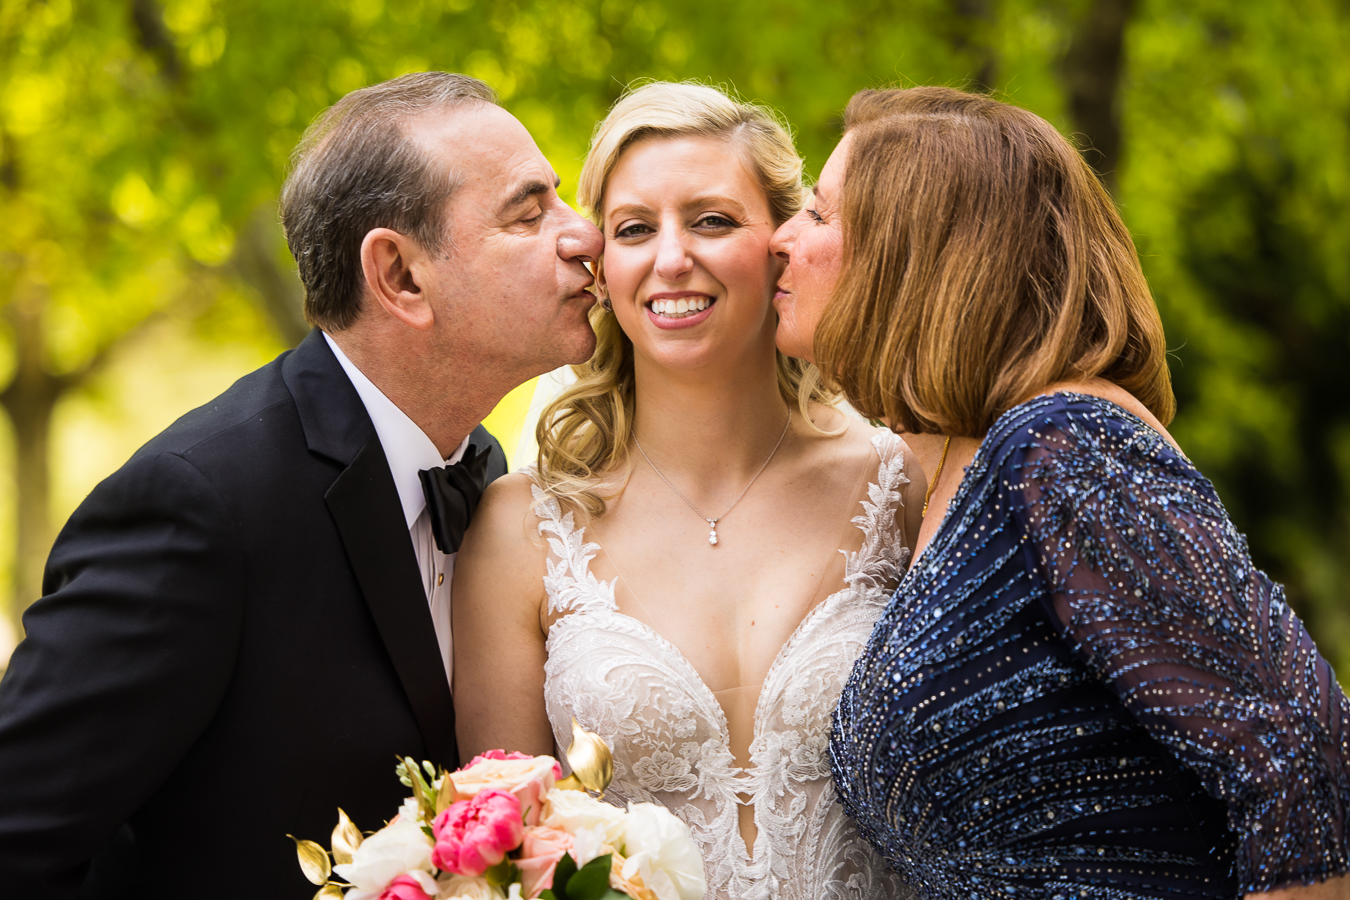  lisa rhinehart, captures this candid, fun, authentic image of the bride smiling between her parents as they kiss her on the cheek before her wedding ceremony at the Palace